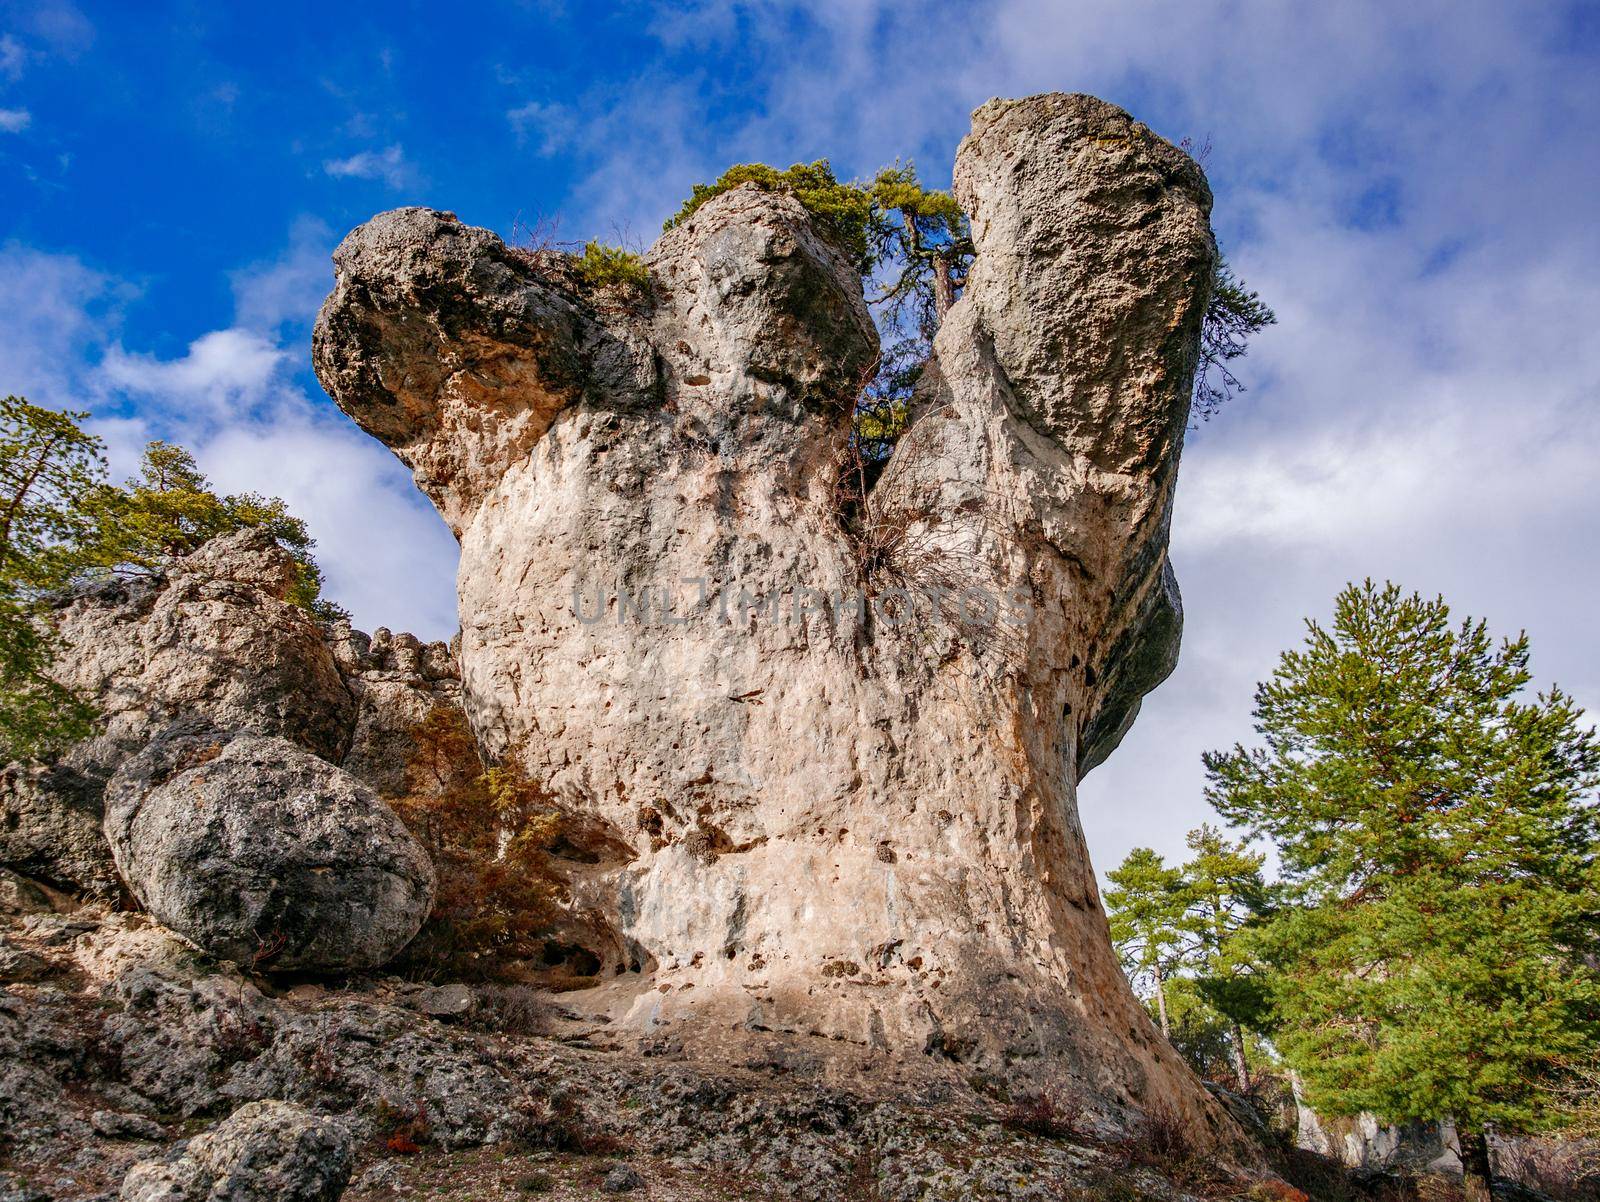 Detailed view of karstic formations in the Majadas park, Cuenca